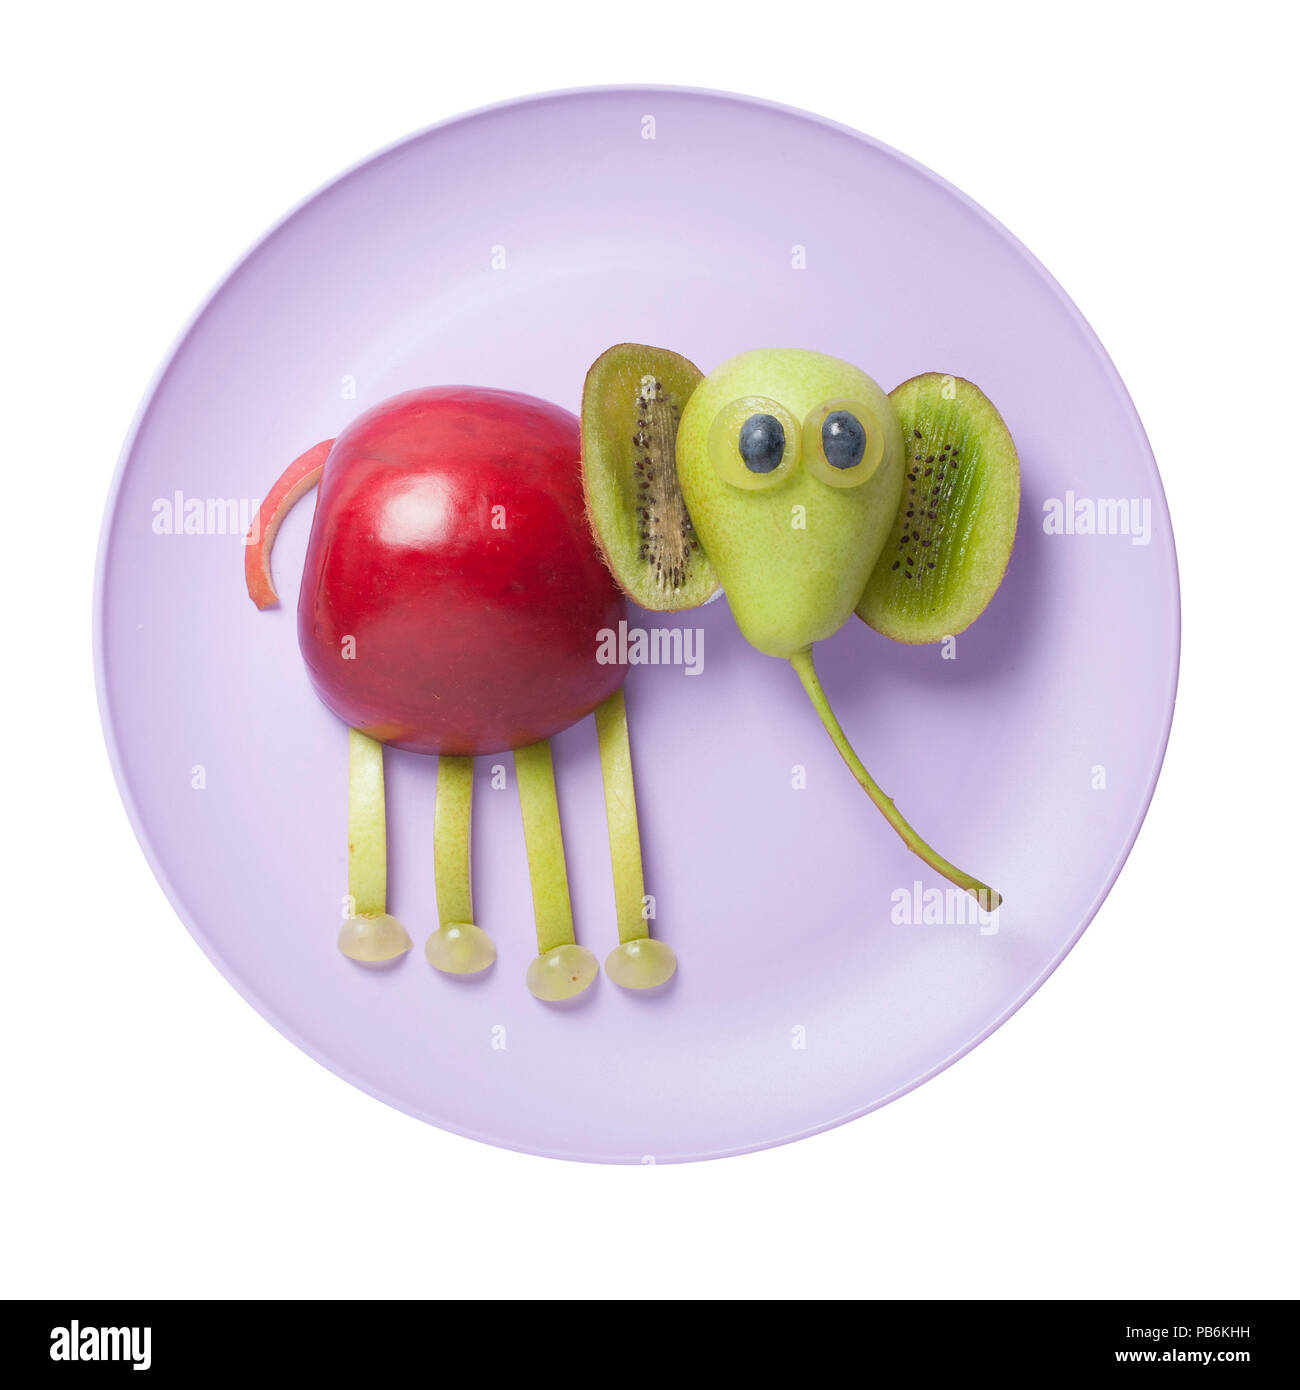 Funny elephant created from fruits on plate Stock Photo